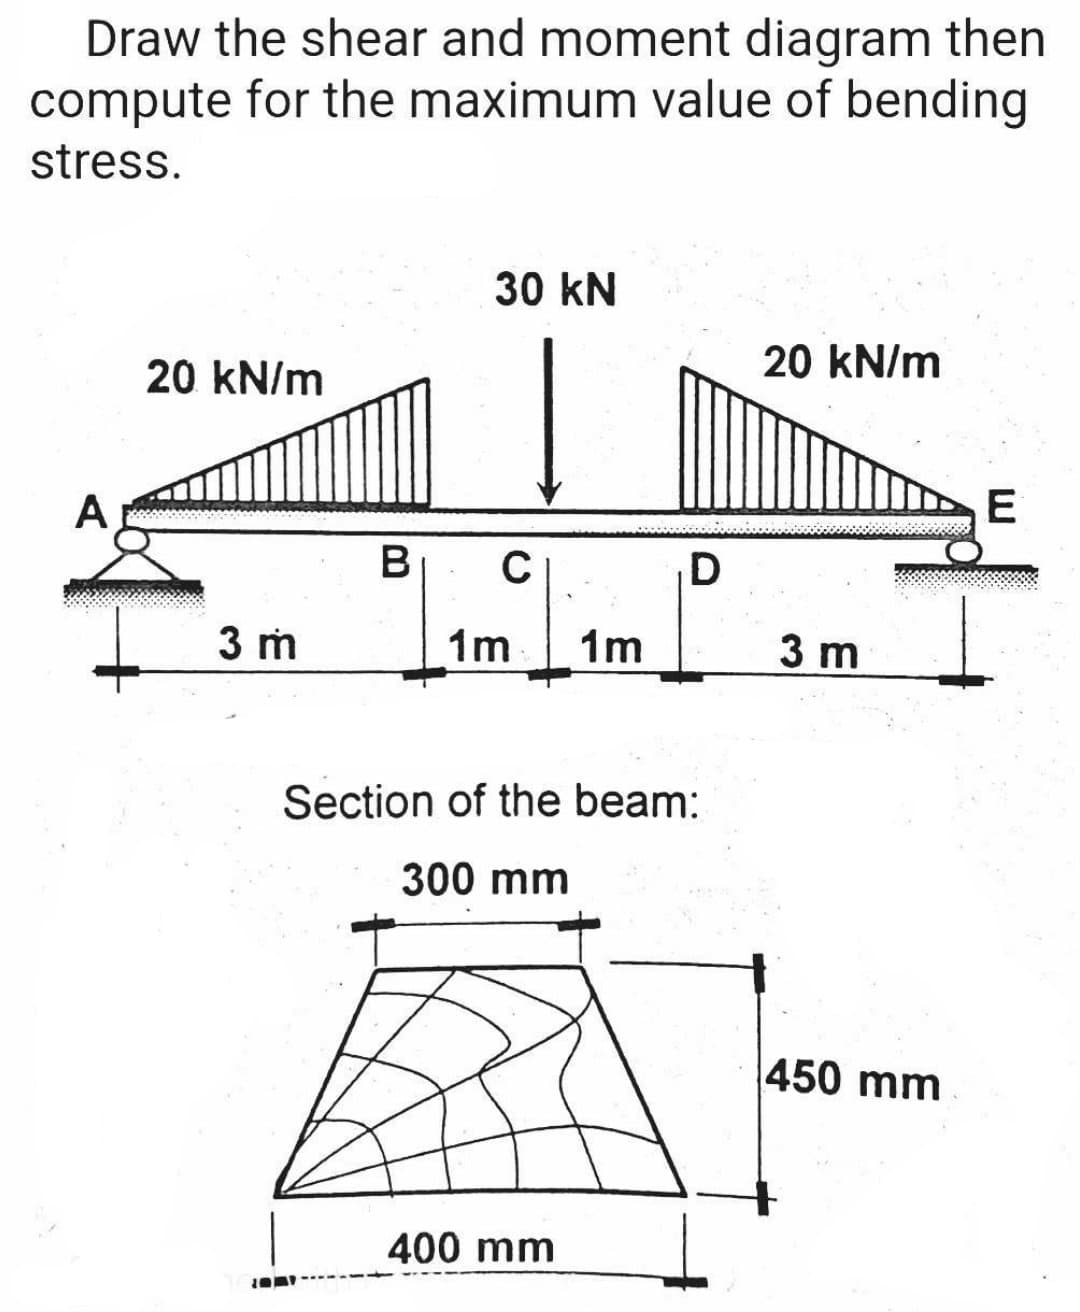 Draw the shear and moment diagram then
compute for the maximum value of bending
stress.
30 kN
20 kN/m
20 kN/m
3 m
3 m
A
B C
D
1m 1m
Section of the beam:
300 mm
400 mm
450 mm
E